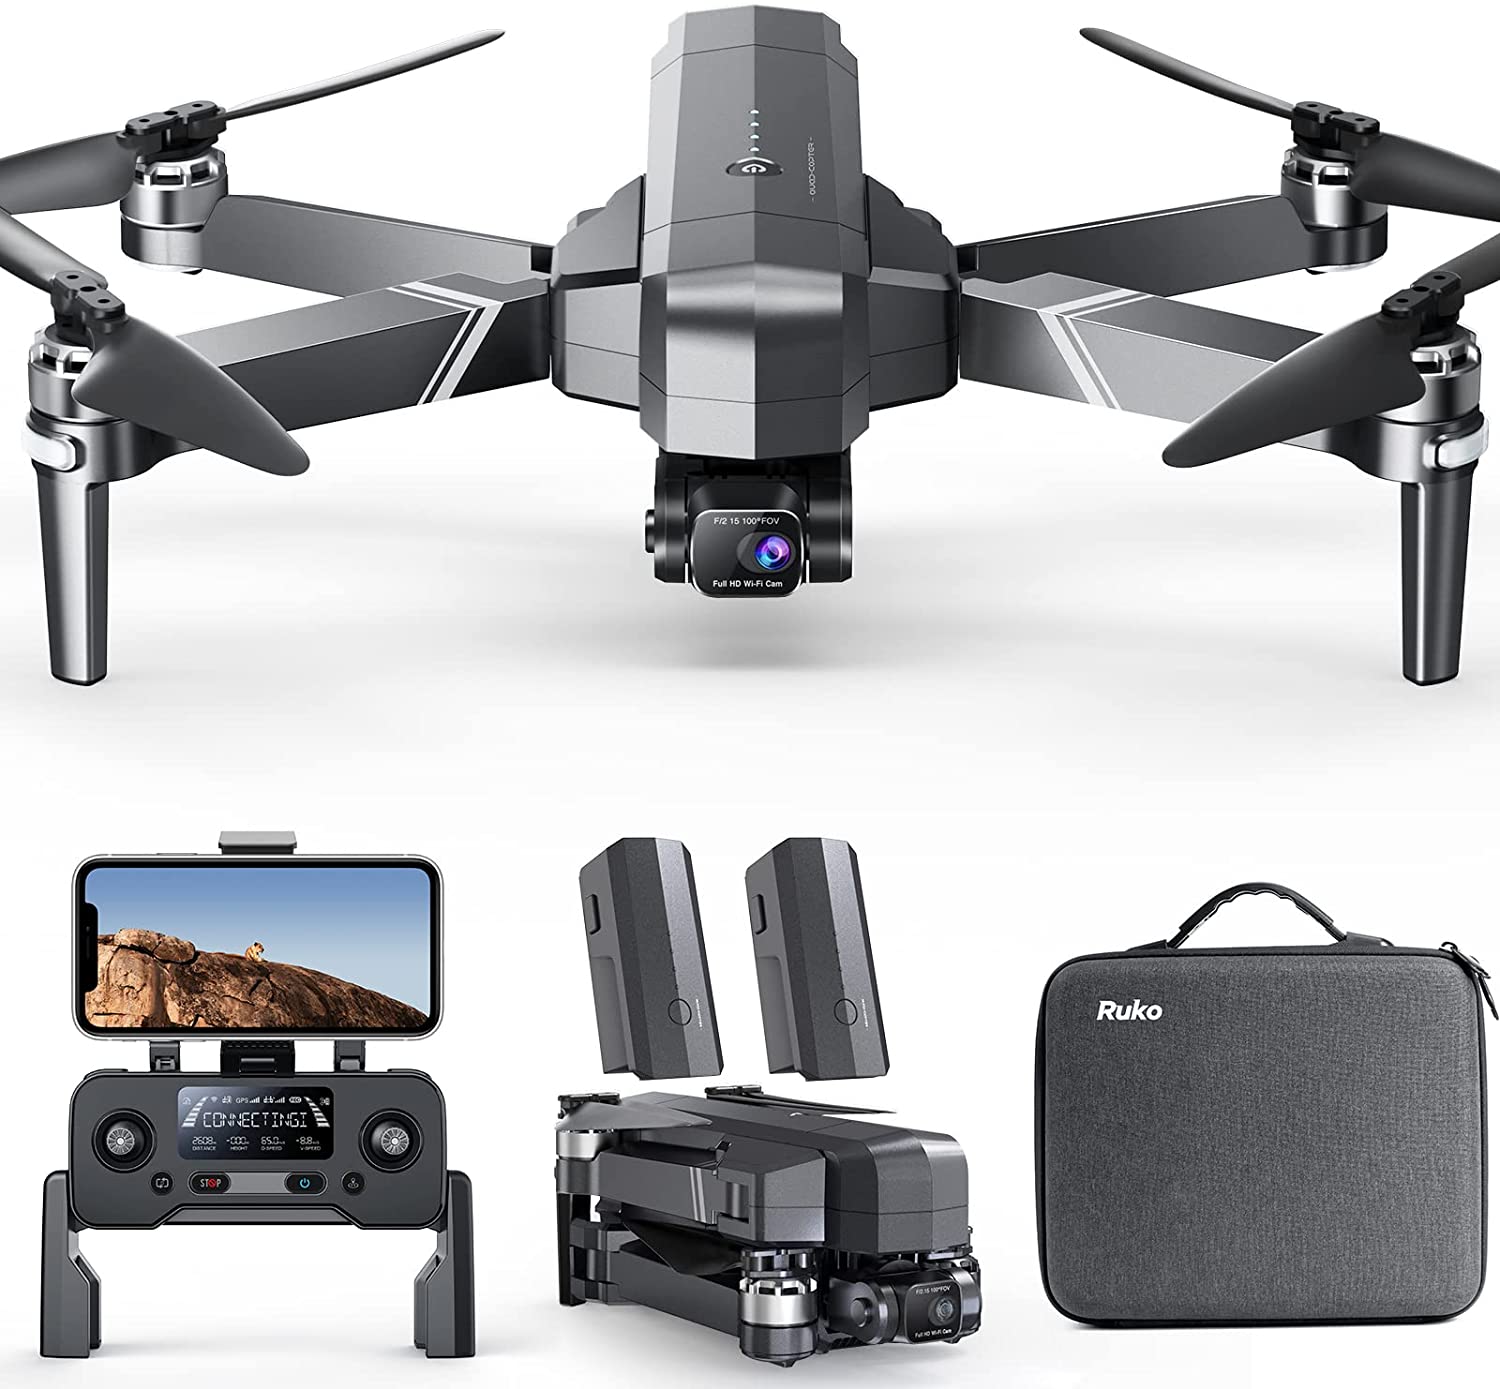 Review of Ruko F11 GIM2 Drone with 4K Camera for Adults, 9800ft HD Video Transmission